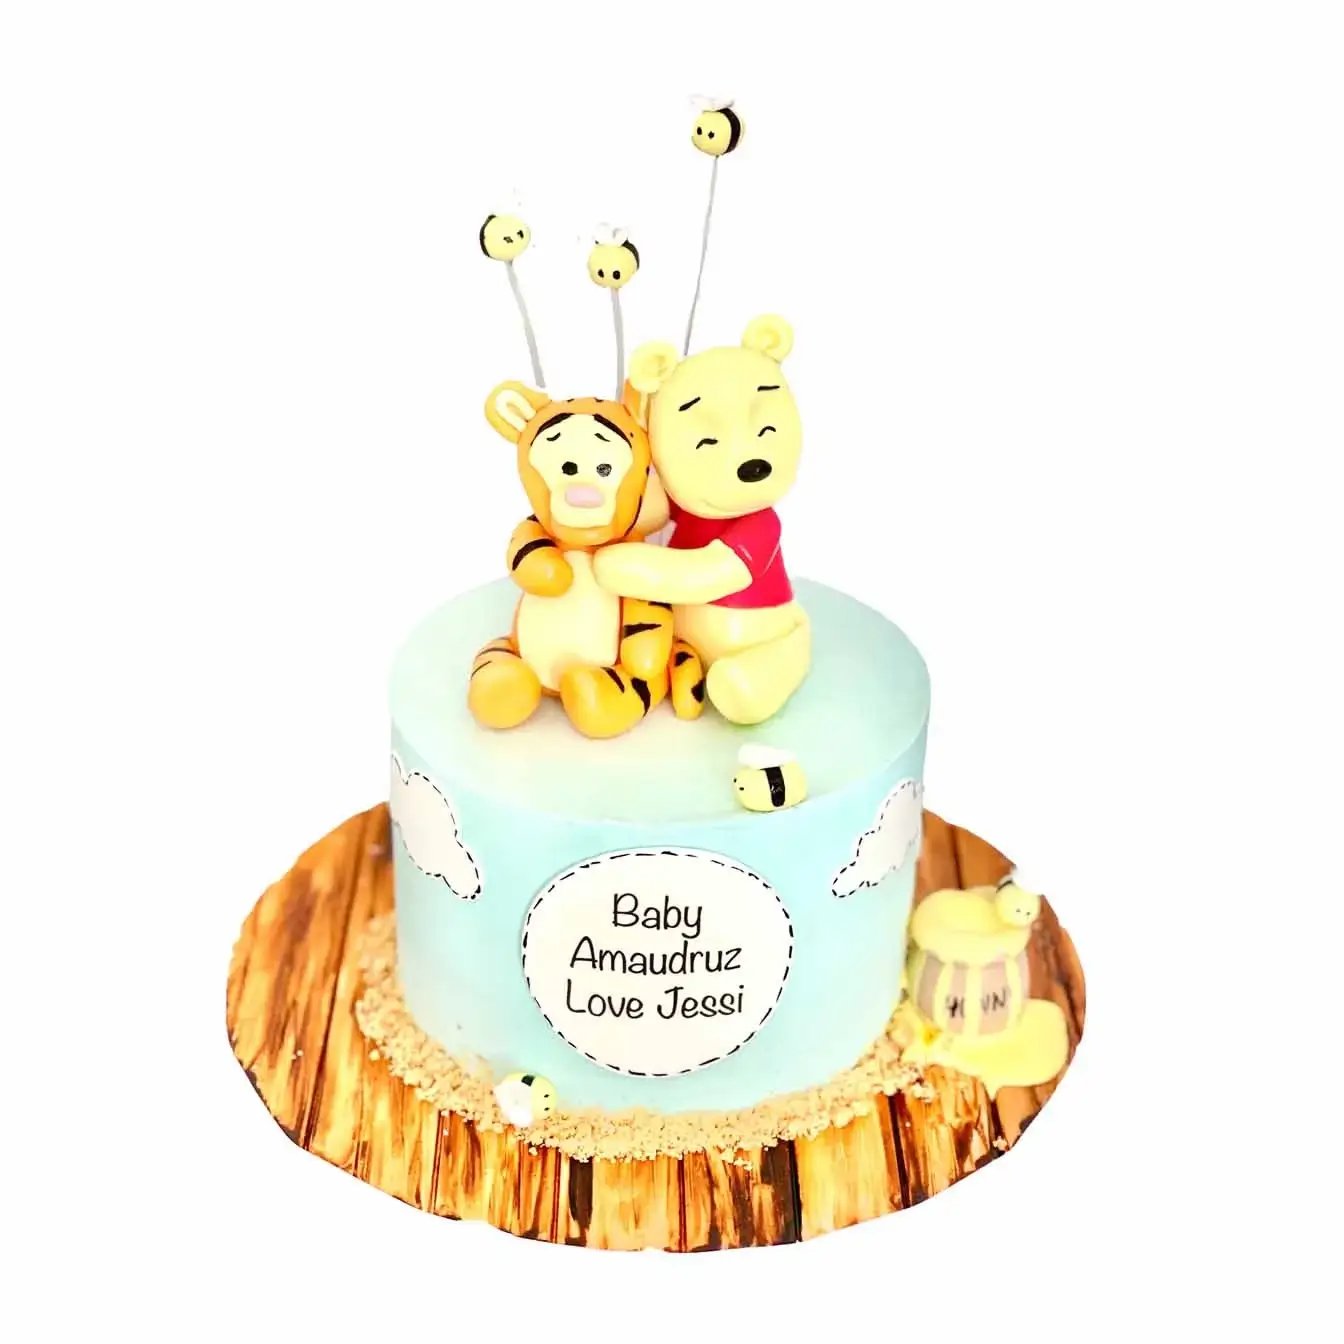 Winnie the Pooh's Sweet Arrival Cake - A blue-iced cake with bees, Winnie the Pooh, Tigger, and honey pots, a delightful centerpiece for a Winnie the Pooh-themed baby shower.